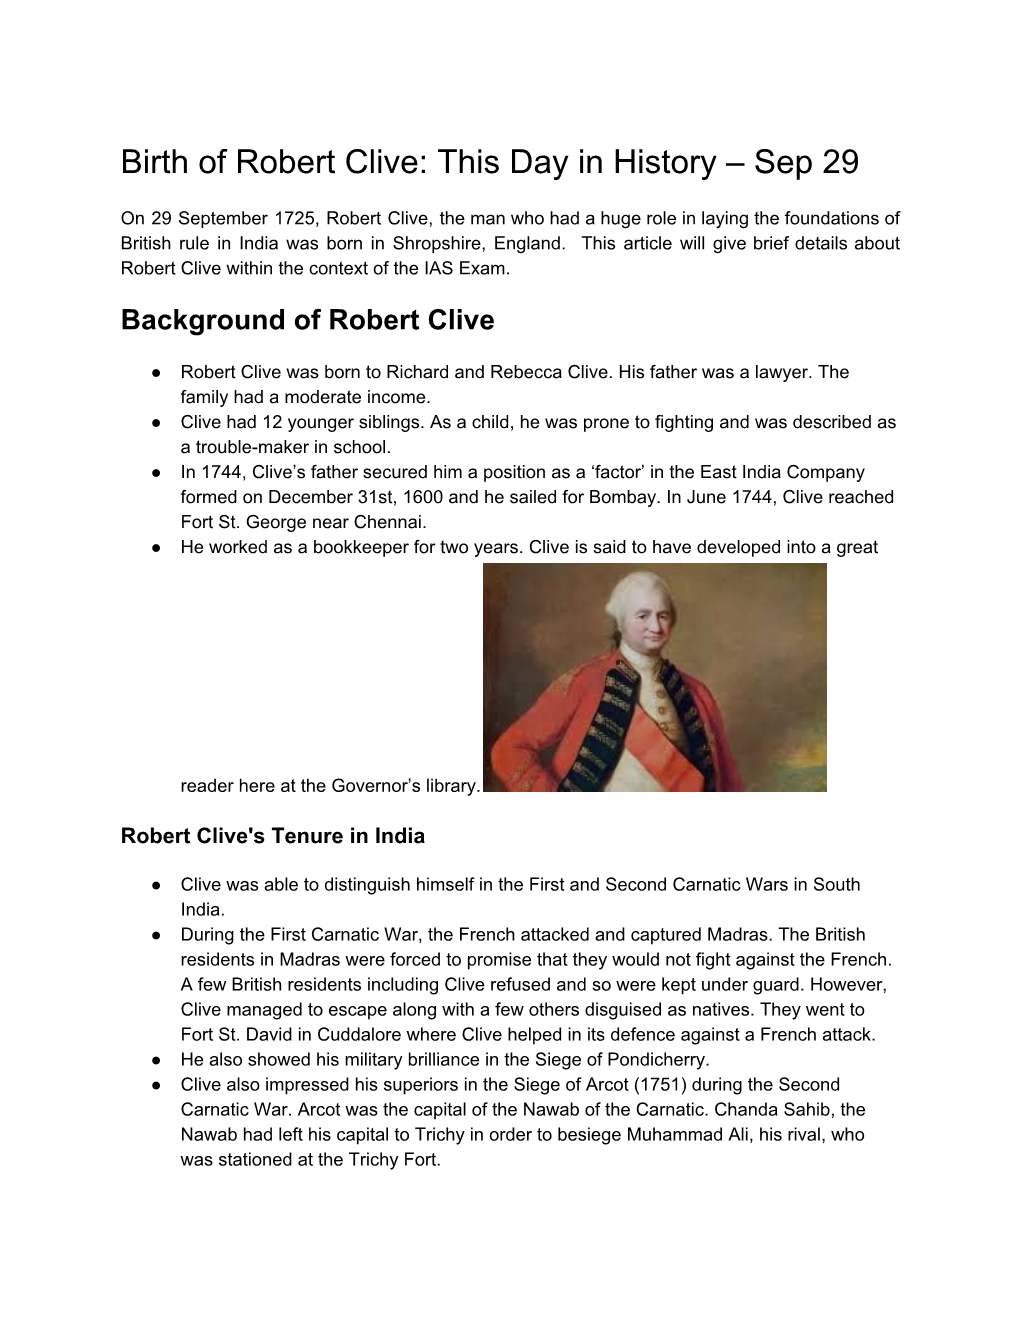 Birth of Robert Clive: This Day in History – Sep 29